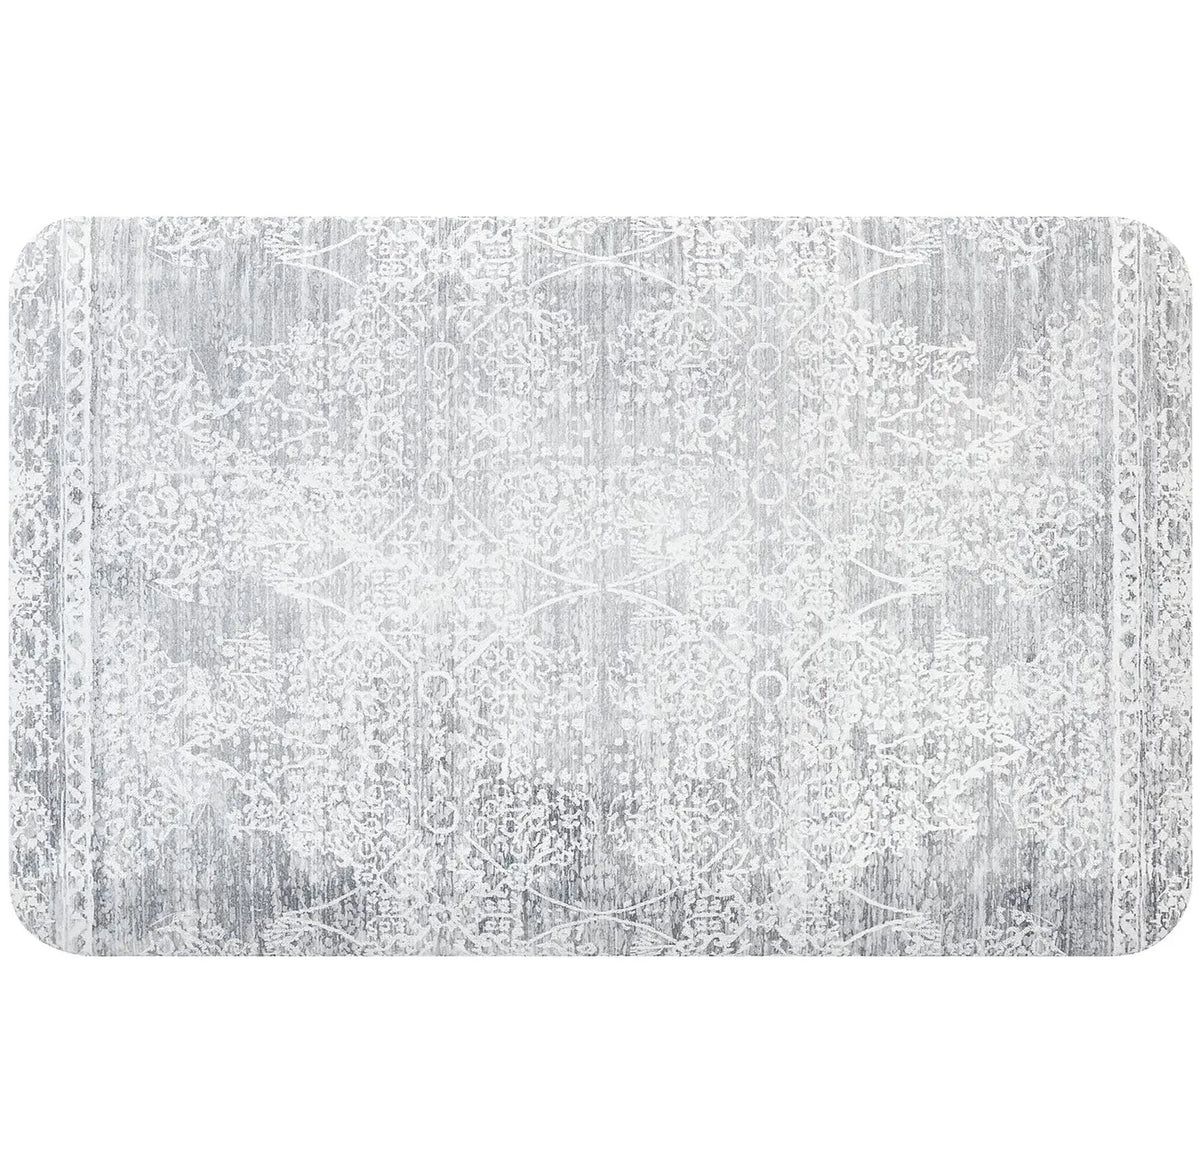 Nama Standing Mat | Minerals | House of Noa (formerly Little Nomad)